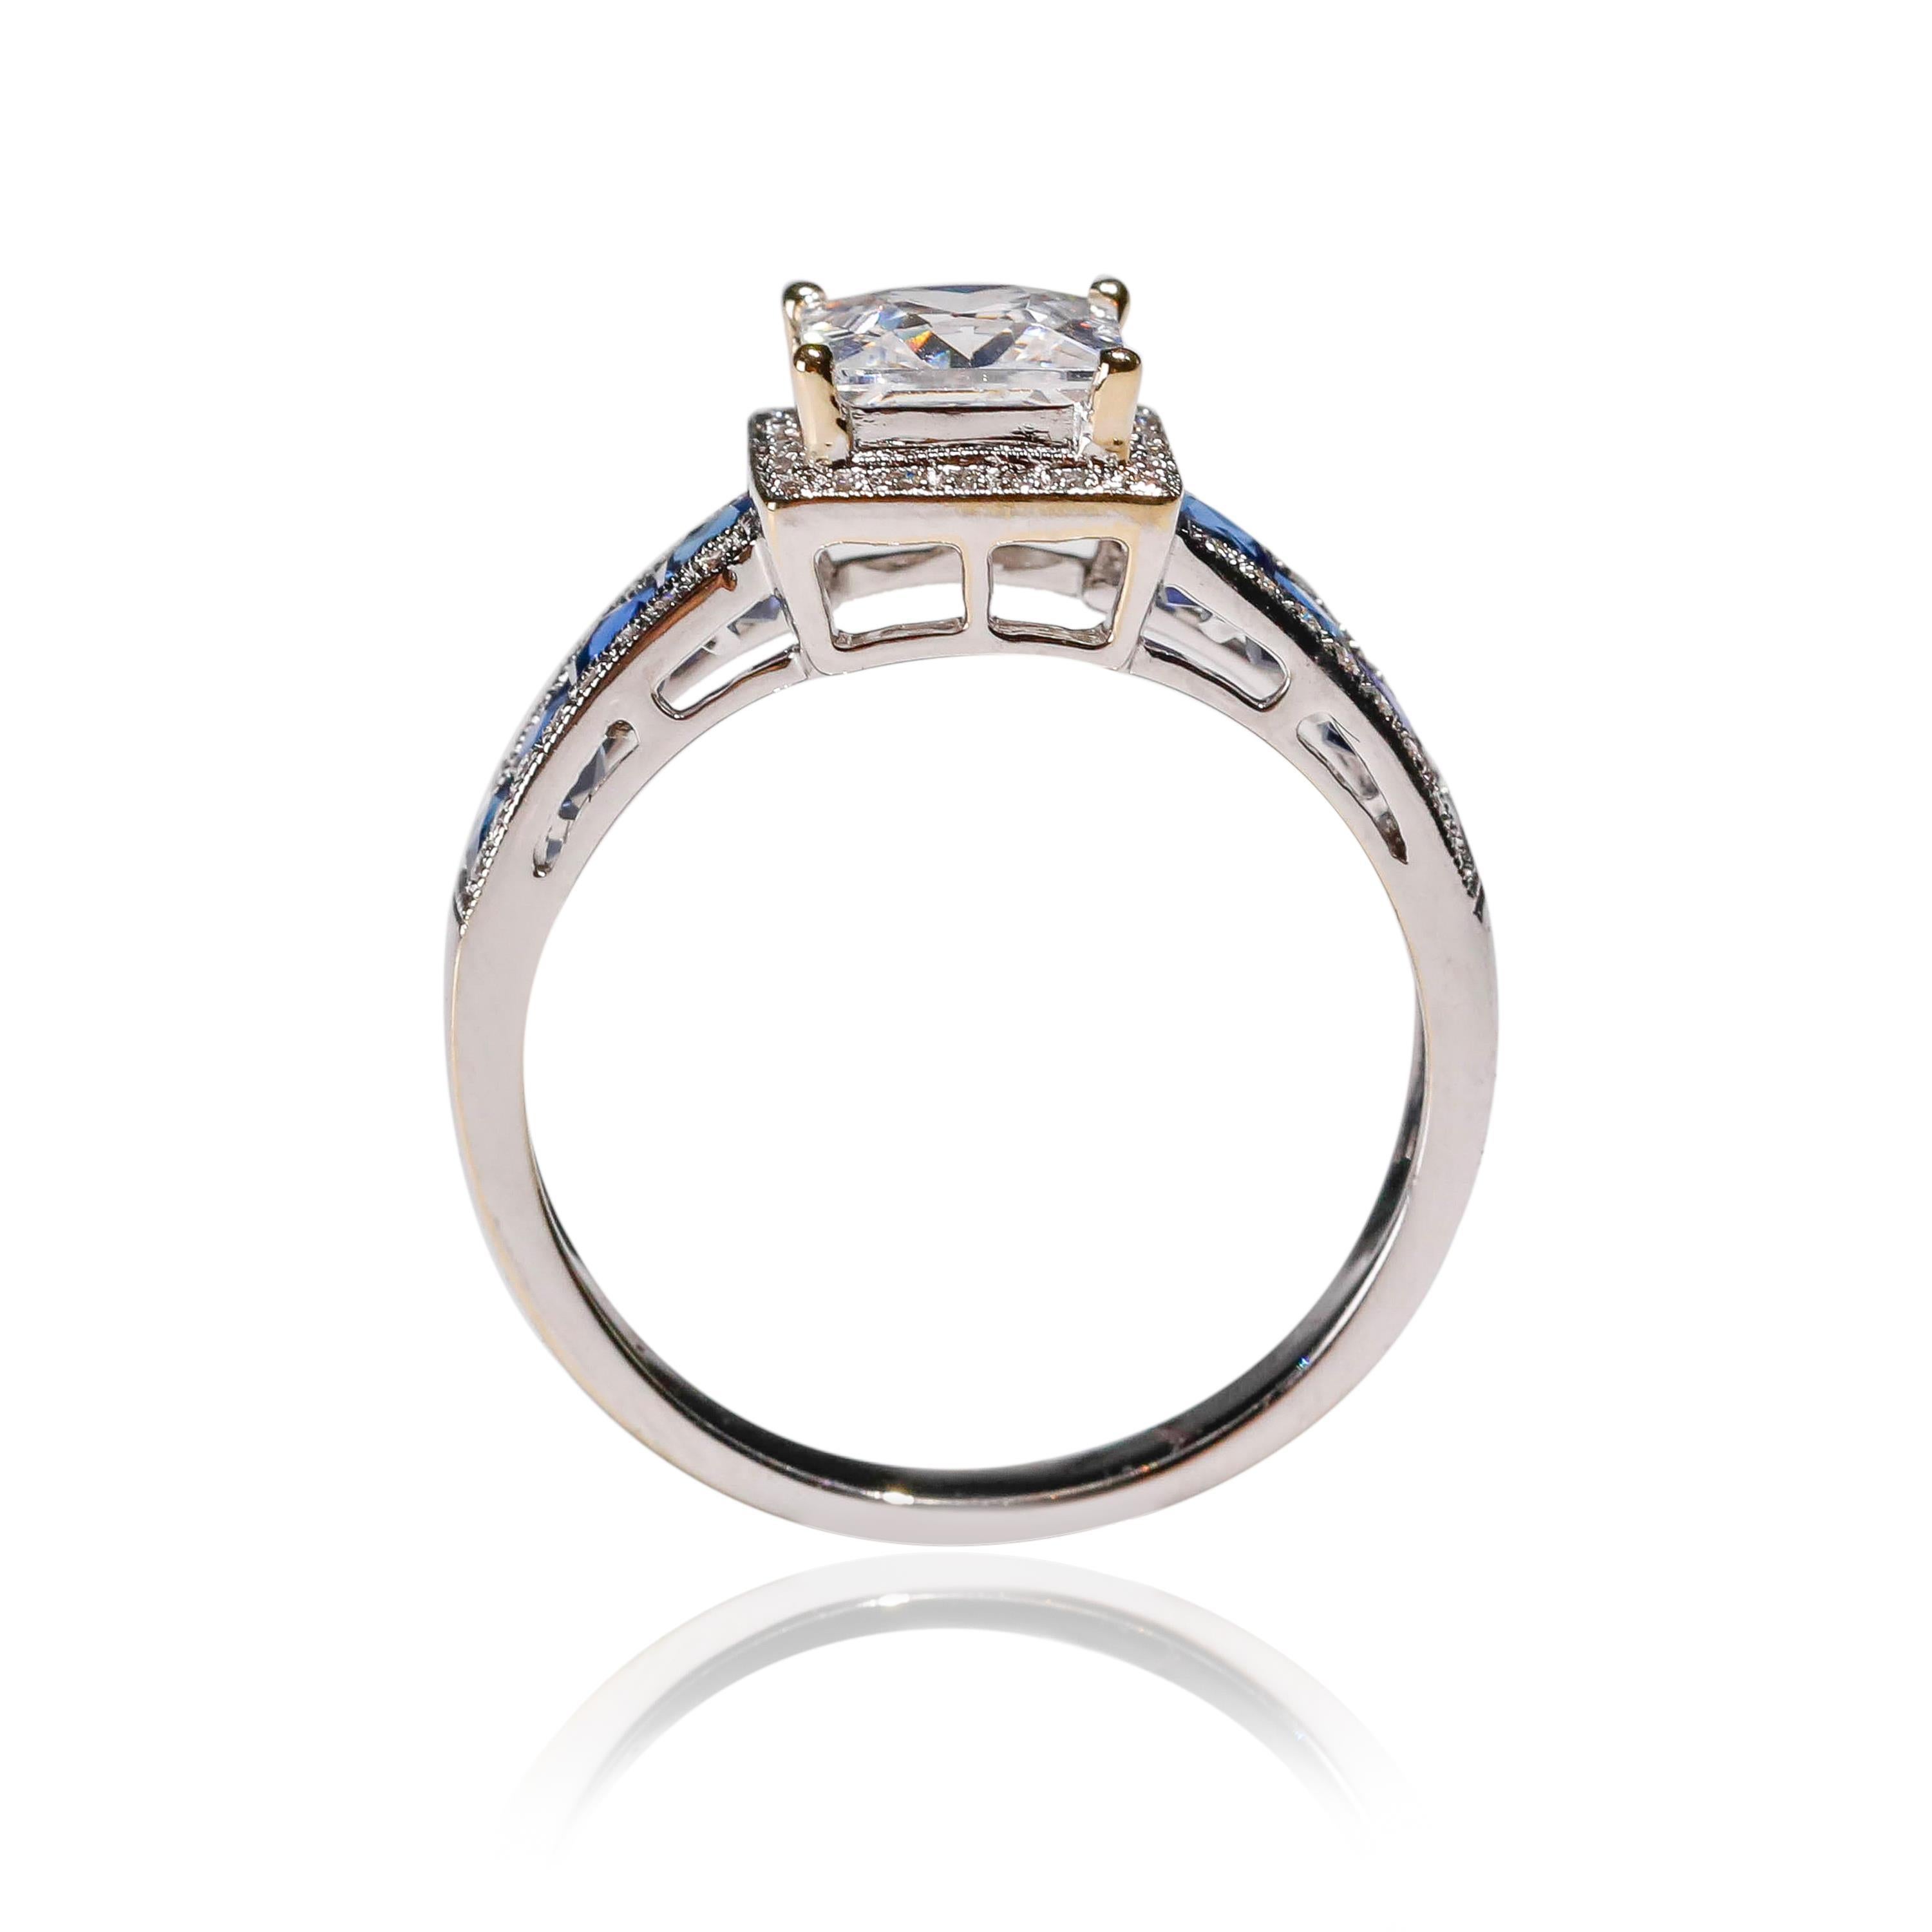 New Art Deco Style 0.17 Ct Diamond 0.9 carat Sapphire Solitaire 18k White Gold Engagement Ring

Crafted in 18kt White Gold, this Unique design showcases a Blue Sapphire 0.9 TCW, set in a halo of round-cut mesmerizing diamonds, Polished to a